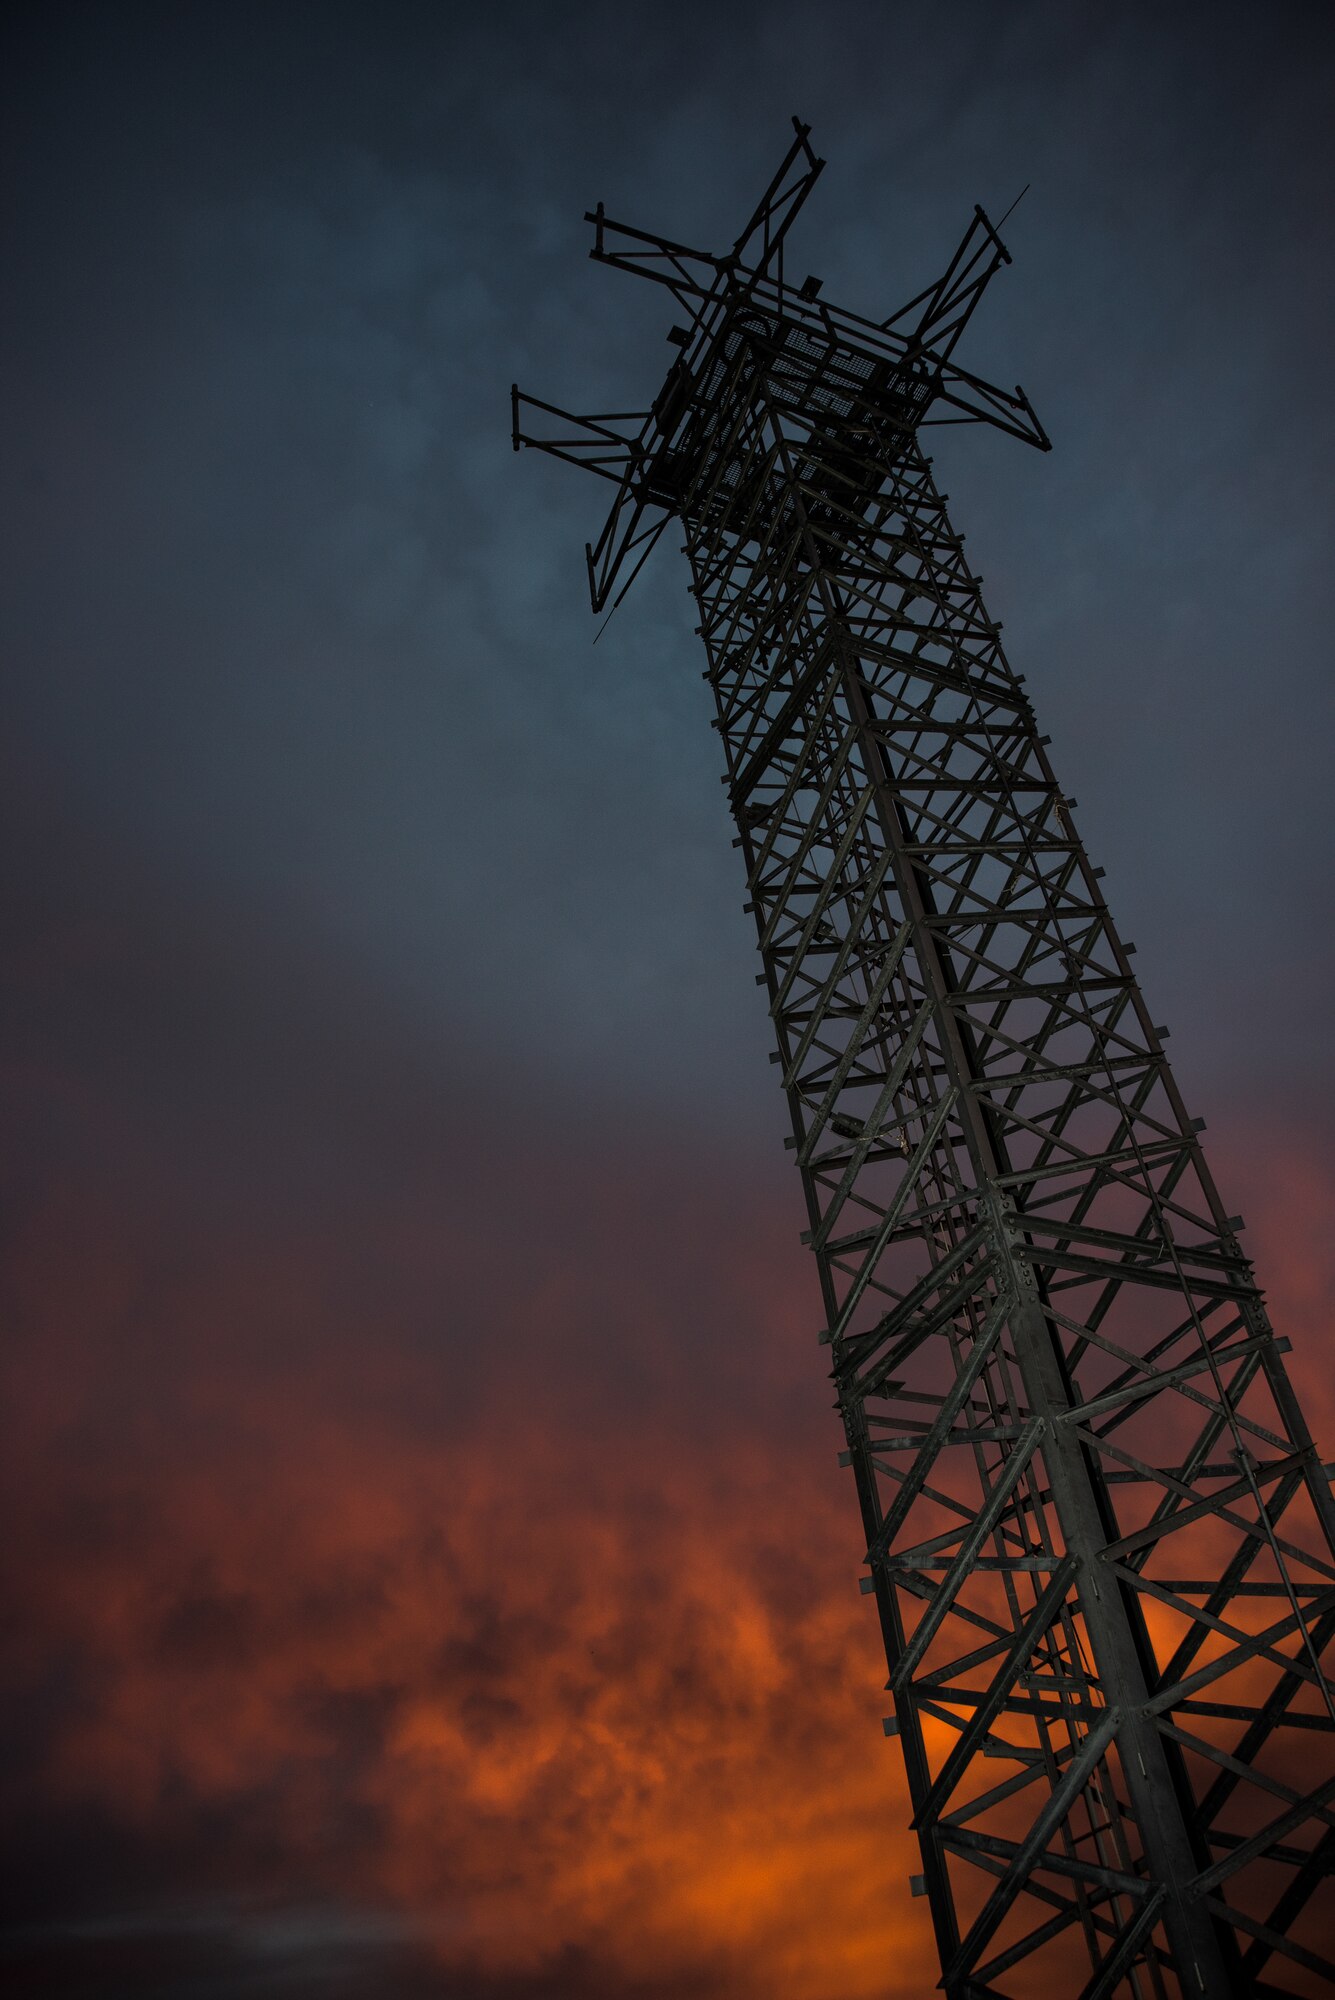 The new 138,600-dollar communications tower, installed Sept. 23, 2016, at WRANGB, Oklahoma, will support the training of air crew in coordination with the MC-12 Tactical Operations Center as part of the new intelligence, surveillance and reconnaissance mission. The base's previous infrastructure did not allow MC-12 aircrews to directly communicate with the ground during training. (U.S. Air National Guard photo by Brigette Waltermire)